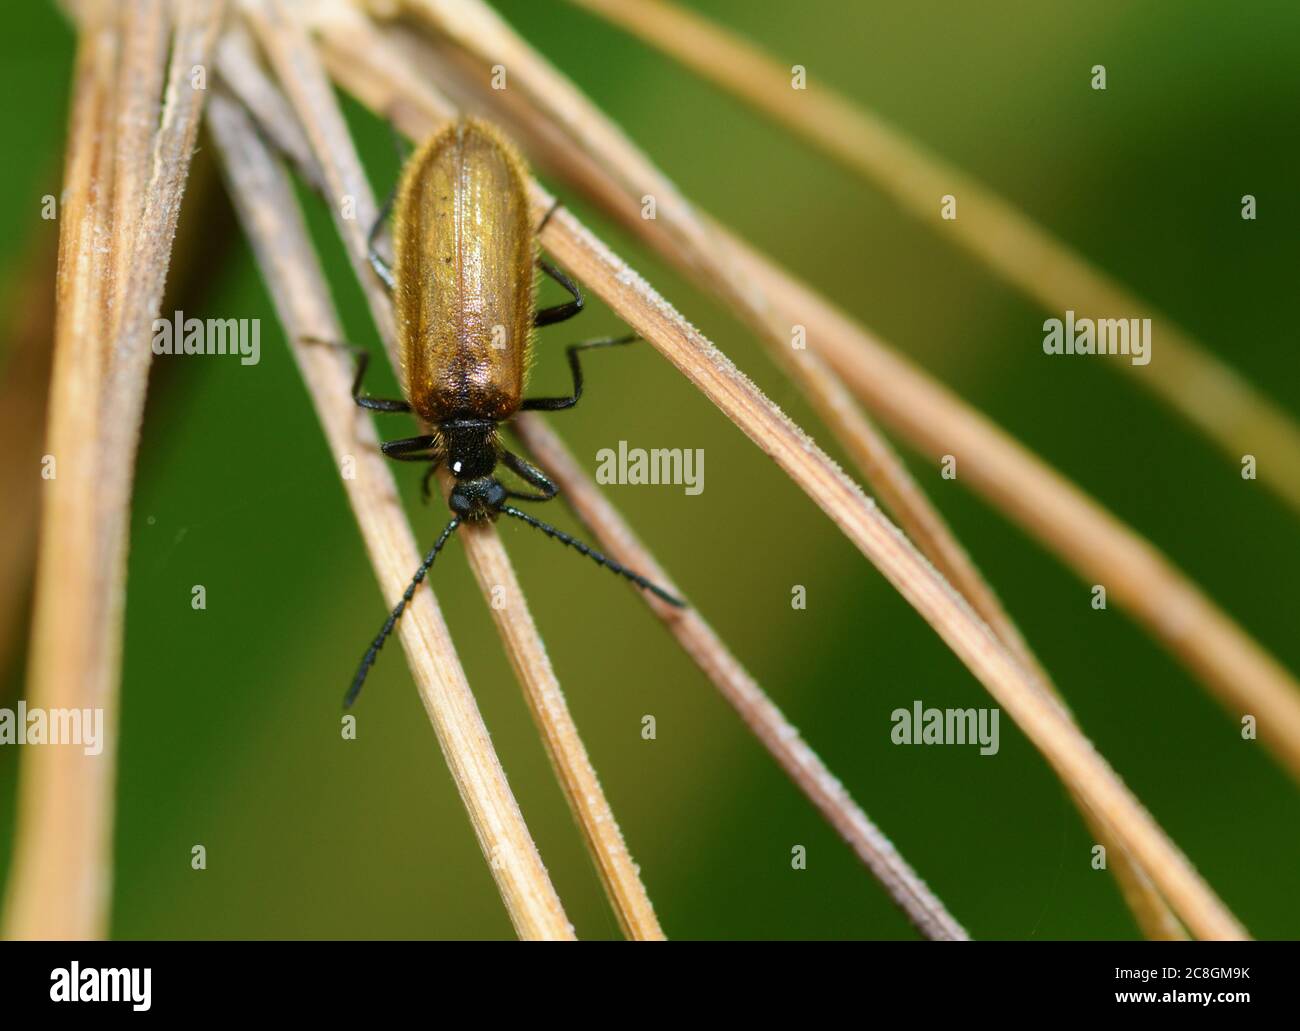 Beetle crawling on a stalk .Insects are very active during the day. Stock Photo